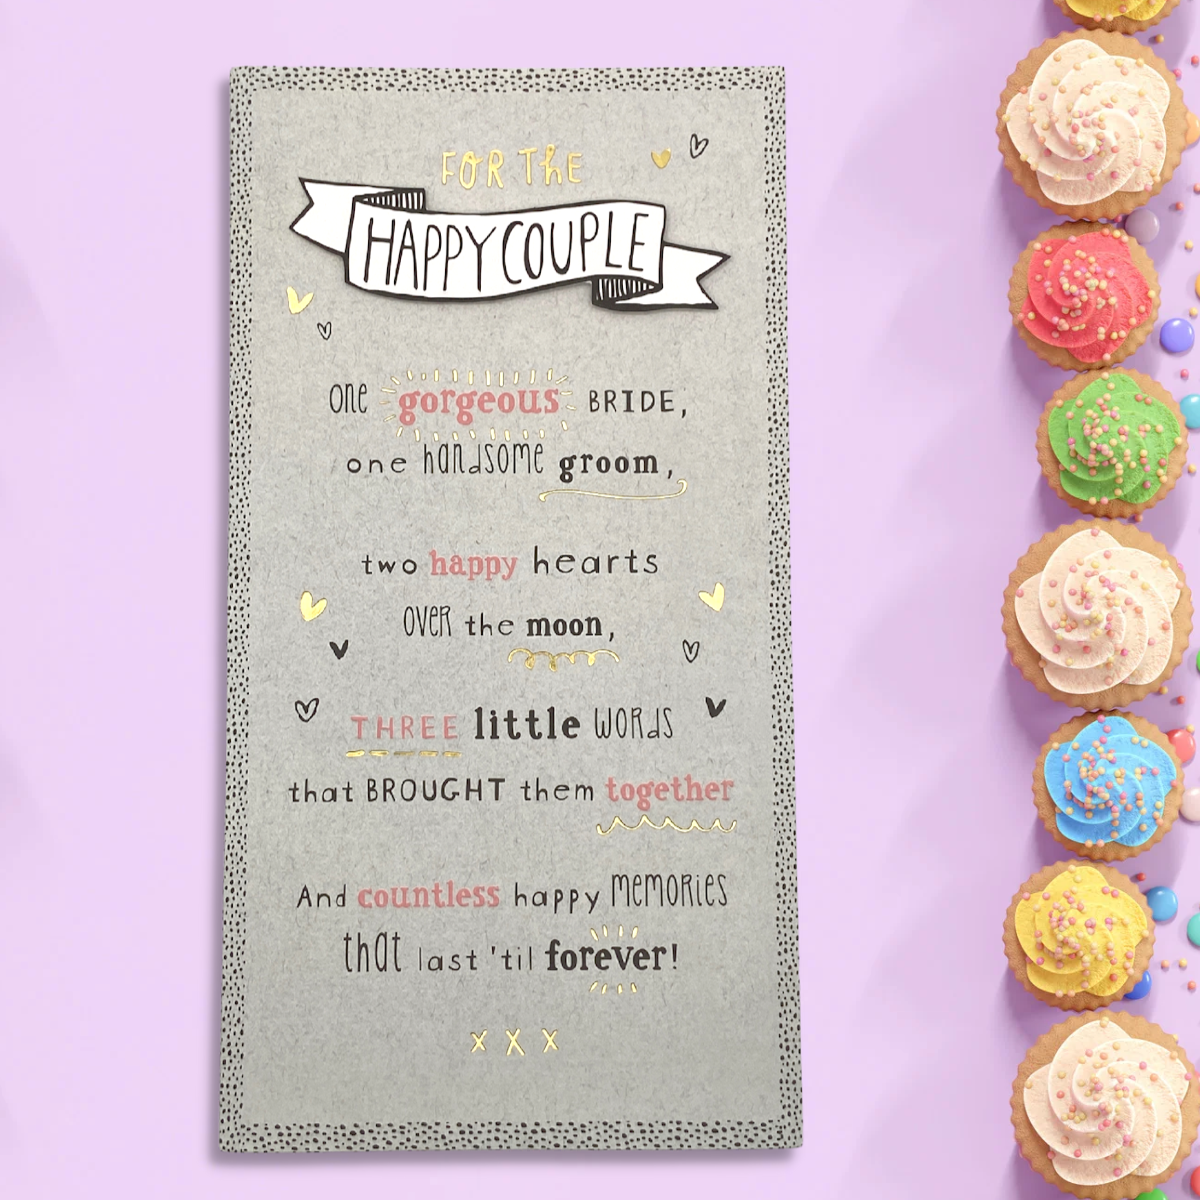 Slim grey card with dotty border and hearts with verse